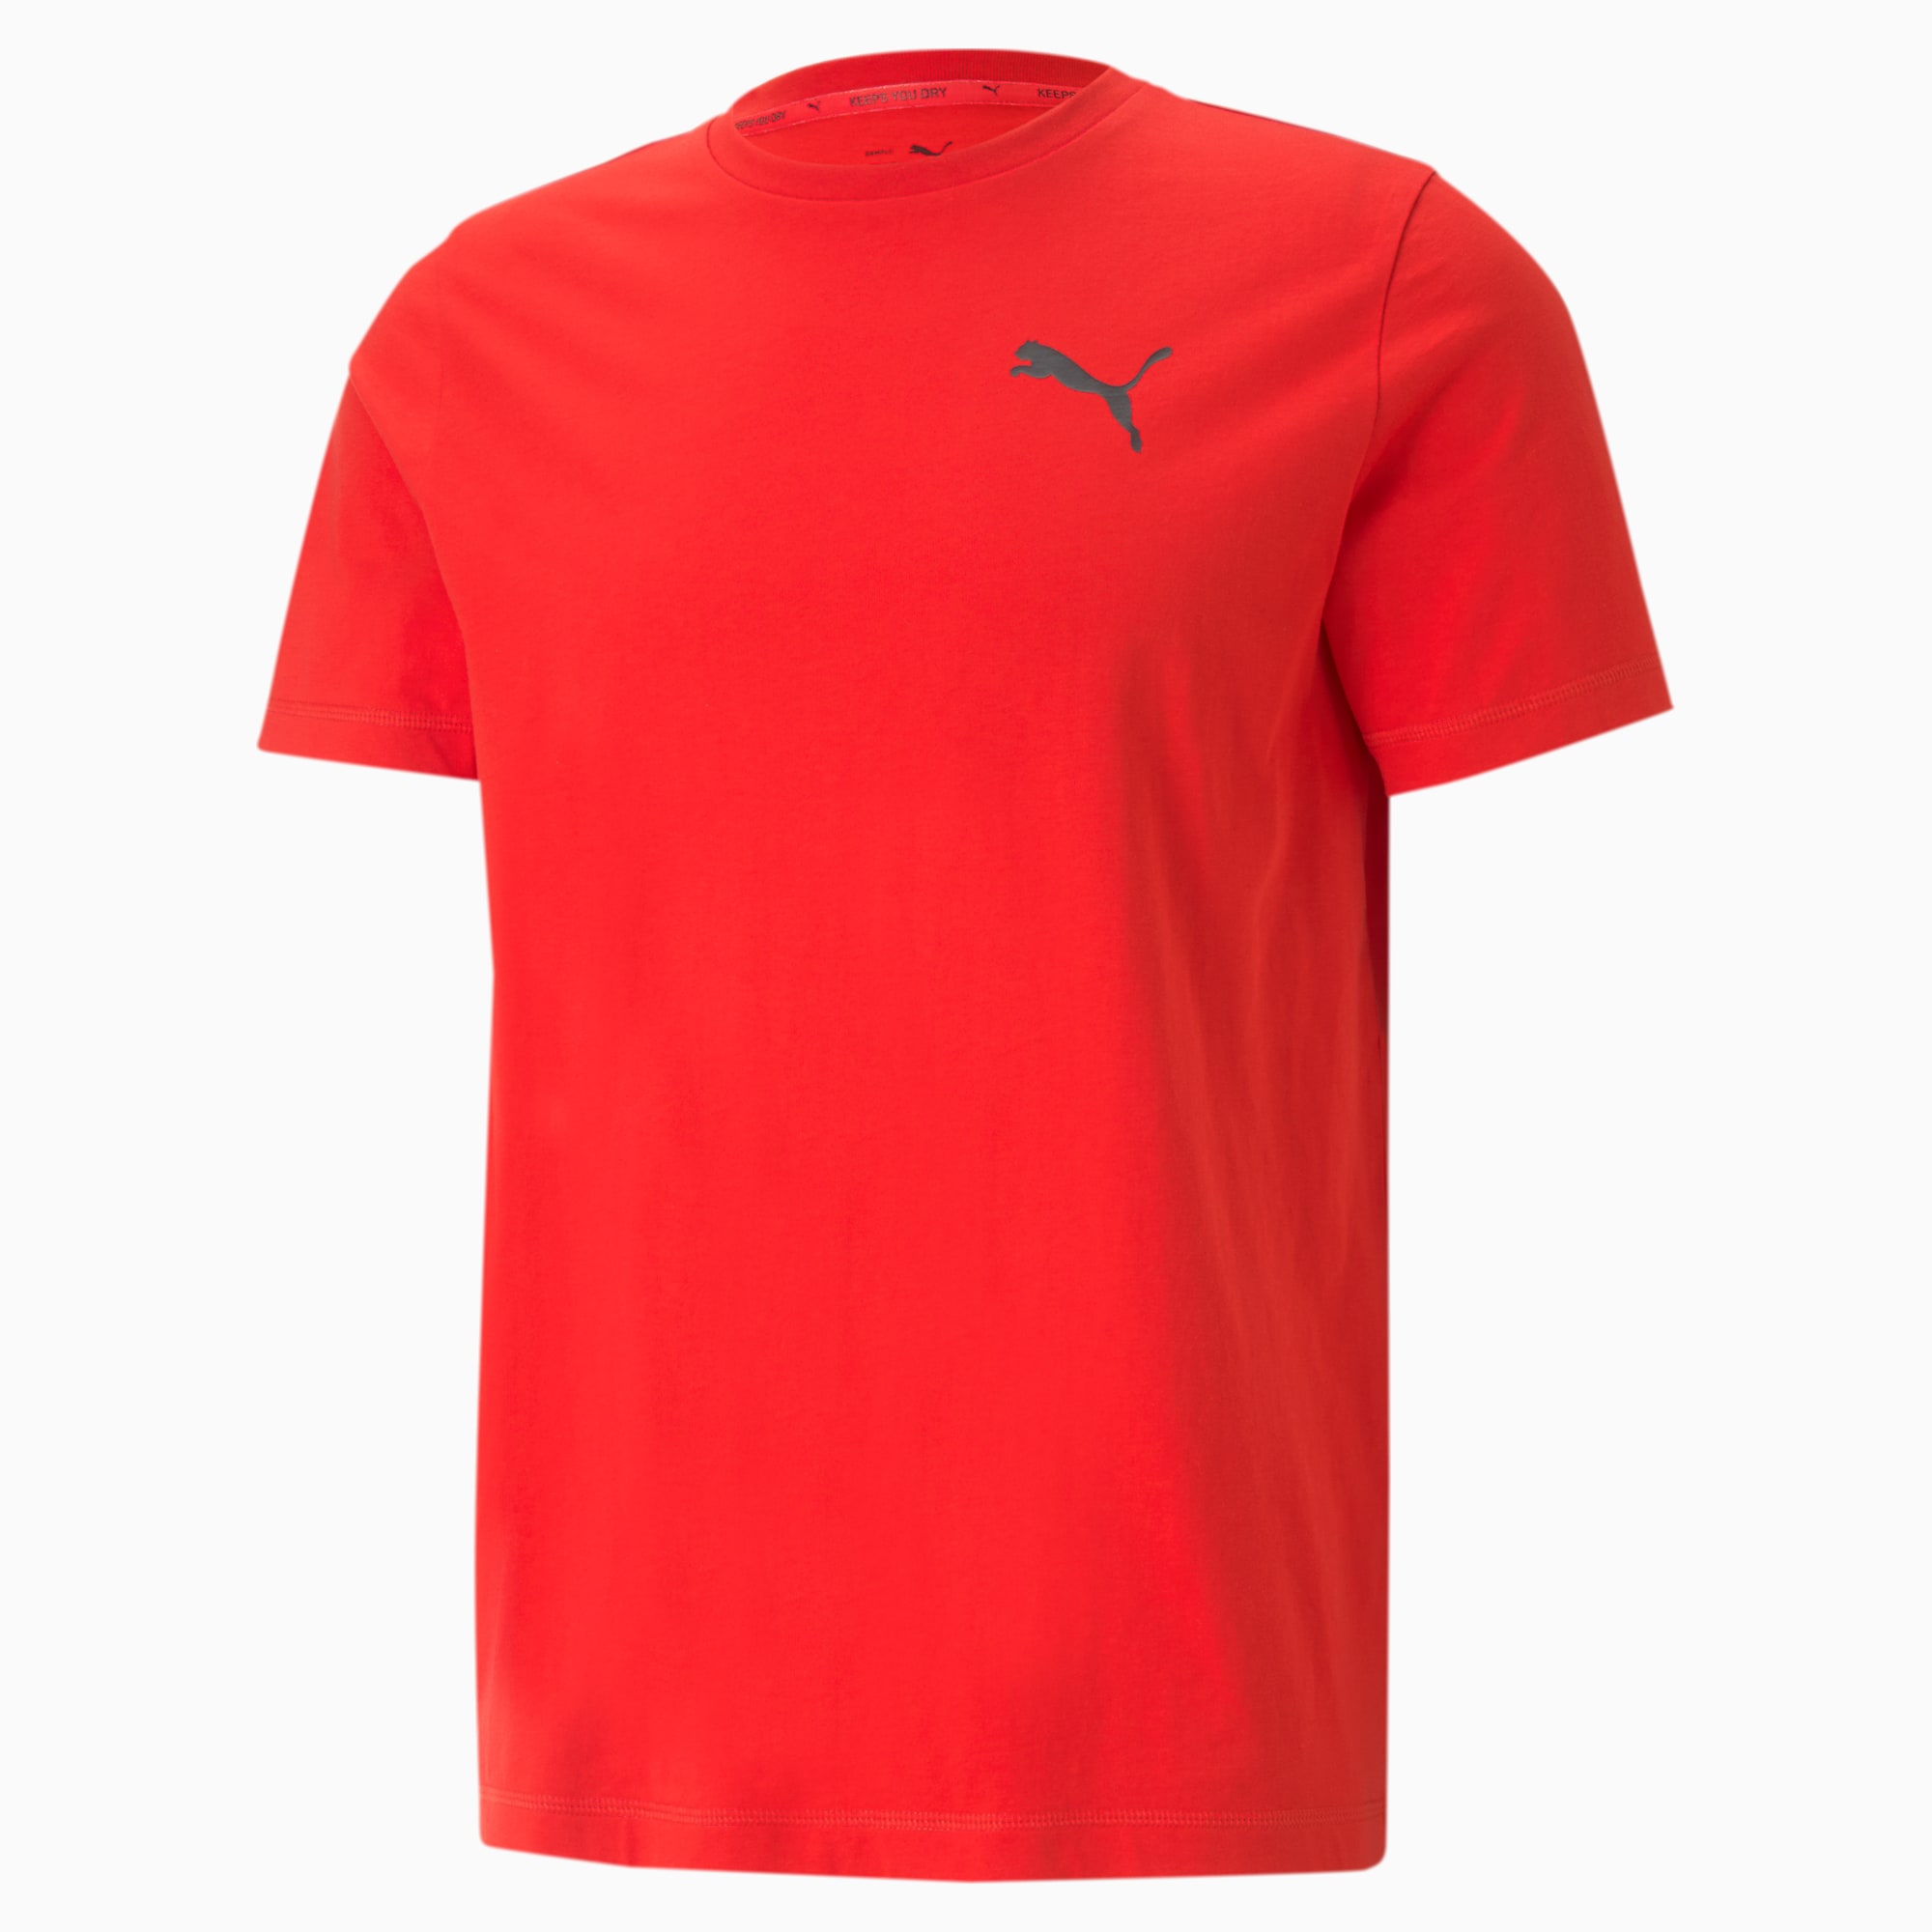 PUMA Active Soft Men's T-Shirt, High Risk Red, Size S, Clothing